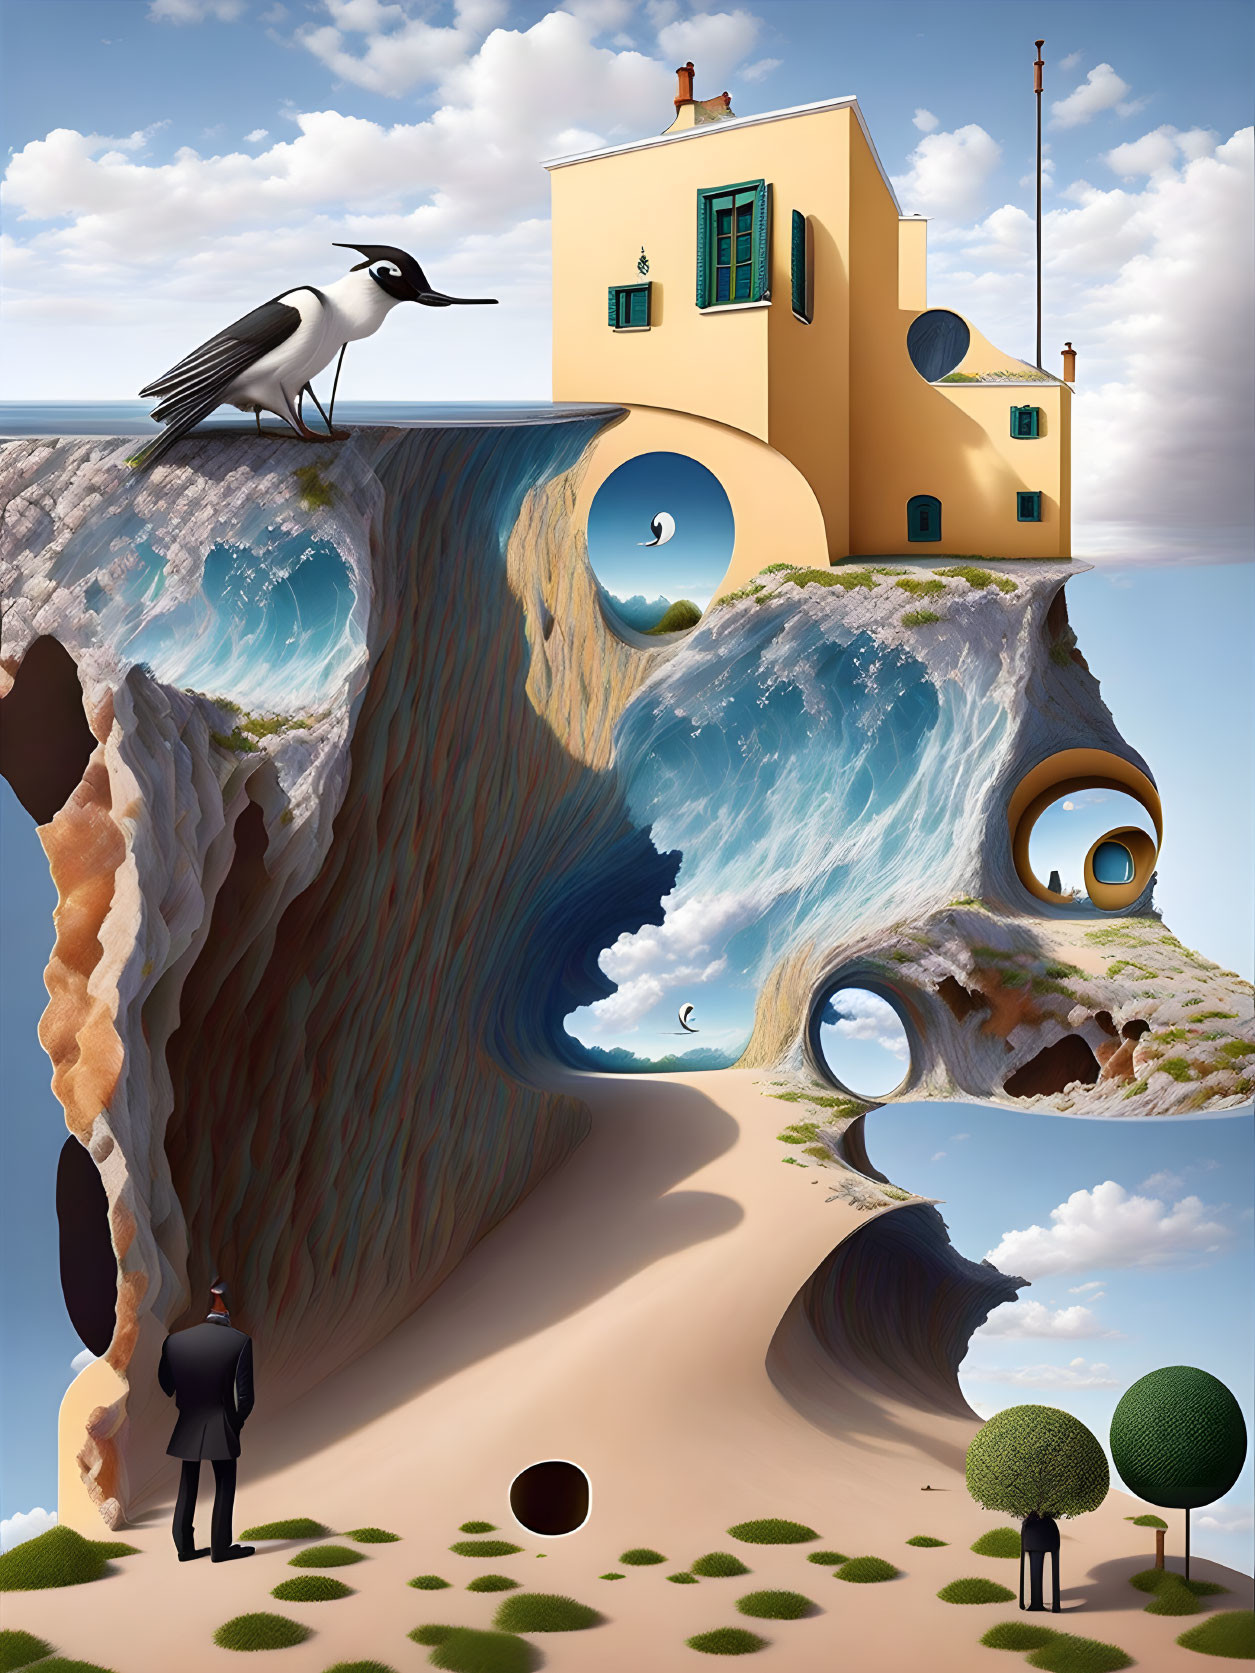 Surreal cliffside house with wave patterns, bird, man, whimsical trees & clouds